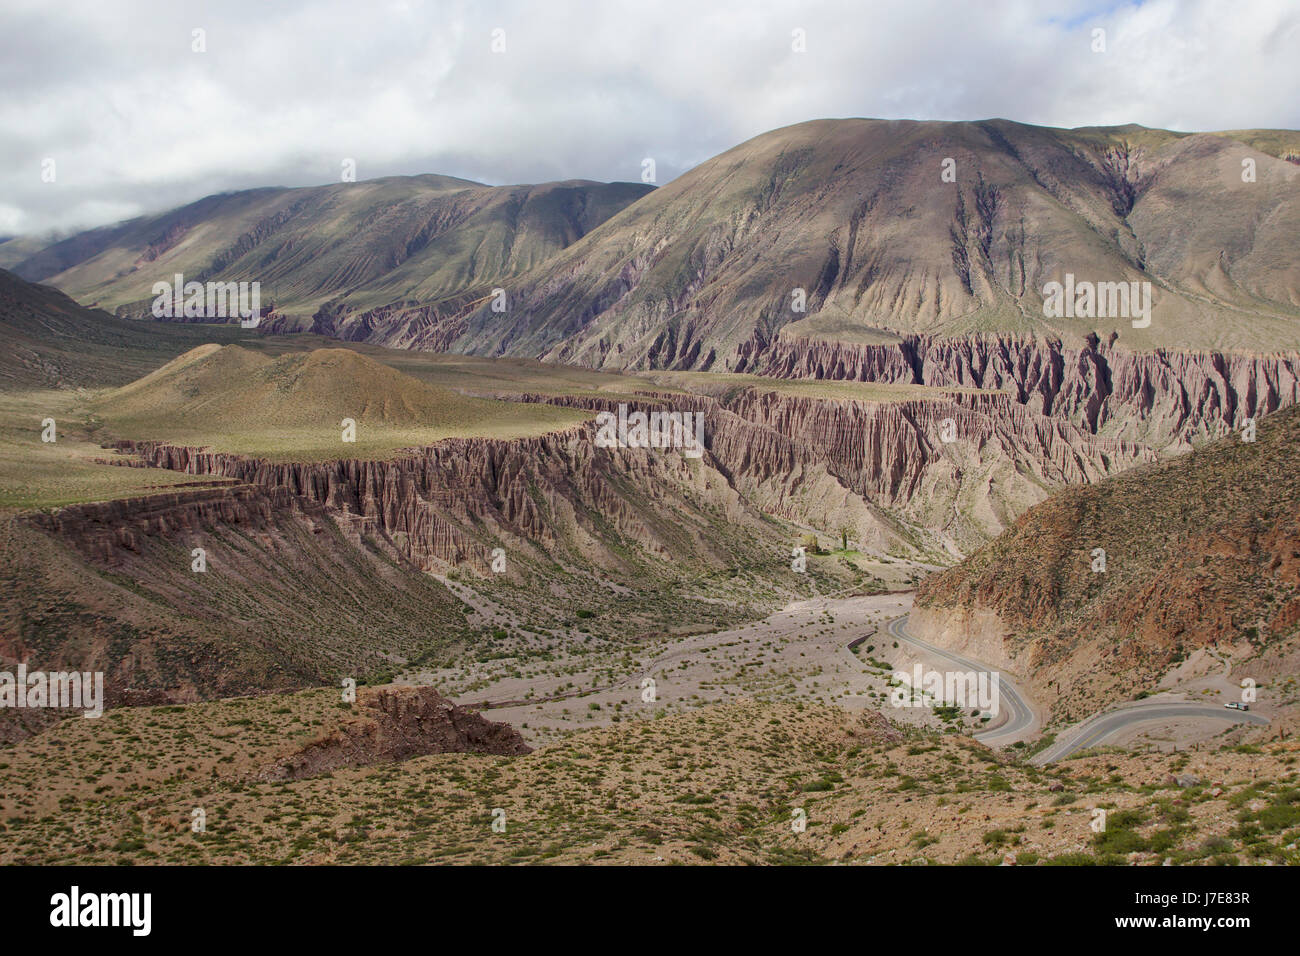 Terrace with quaternary conglomerates near Purmamarca, Jujuy Province, Argentina Stock Photo